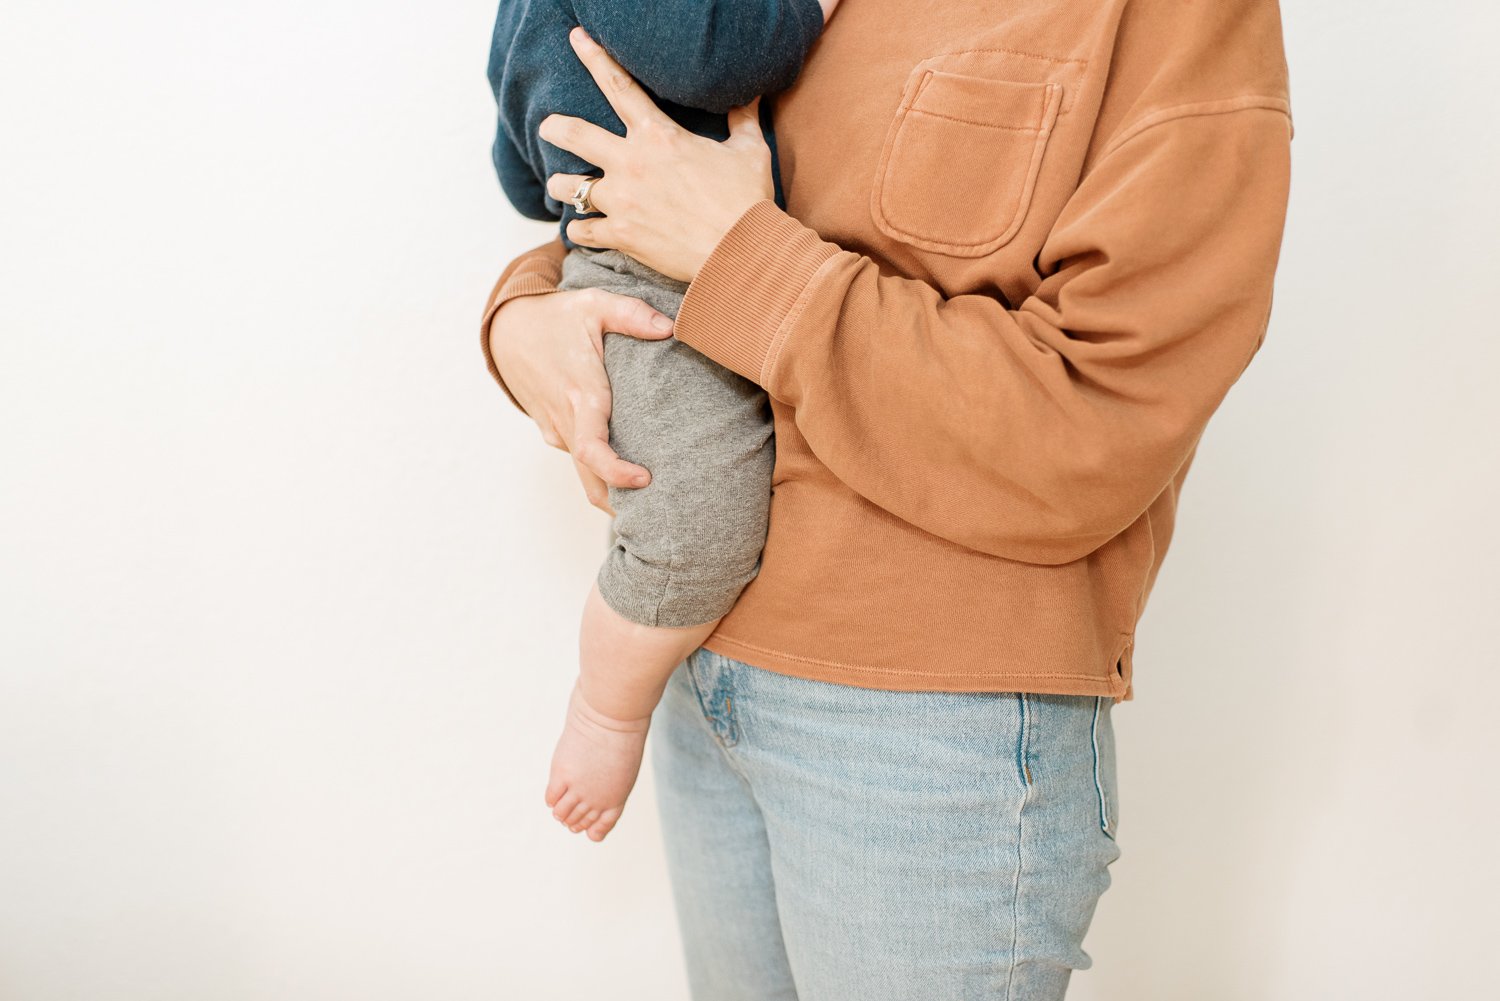 Turn your jeans into cute maternity jeans. — The Overwhelmed Mommy Blog